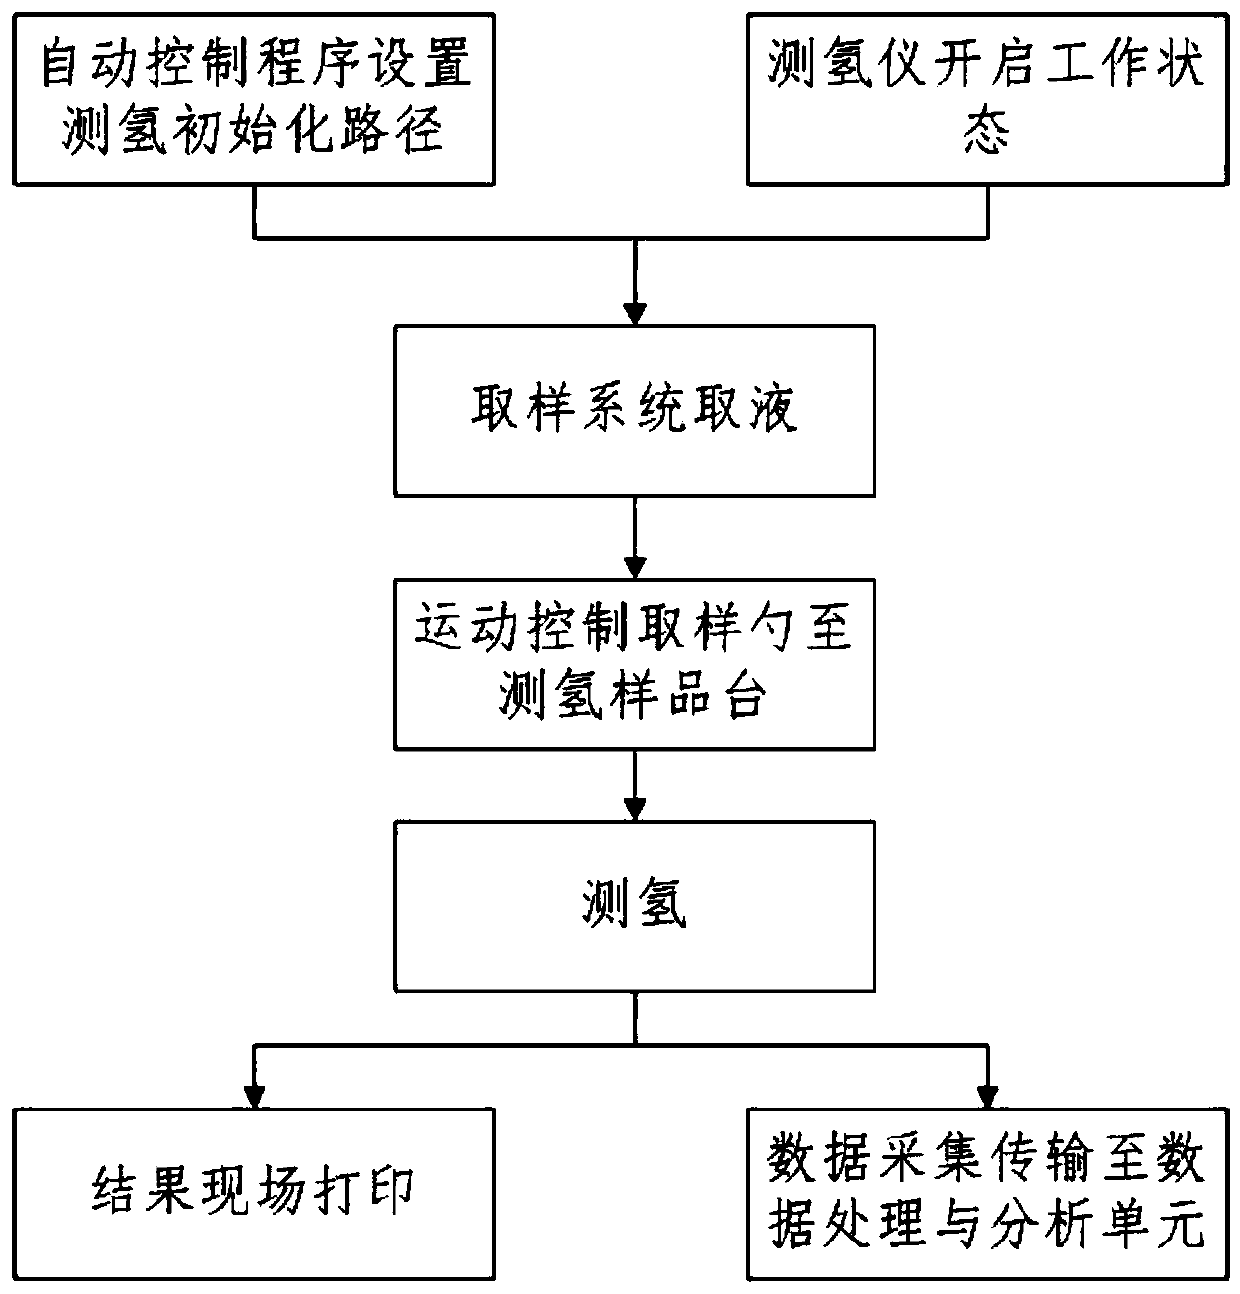 Aluminum alloy casting and smelting process online detection and data application method and system